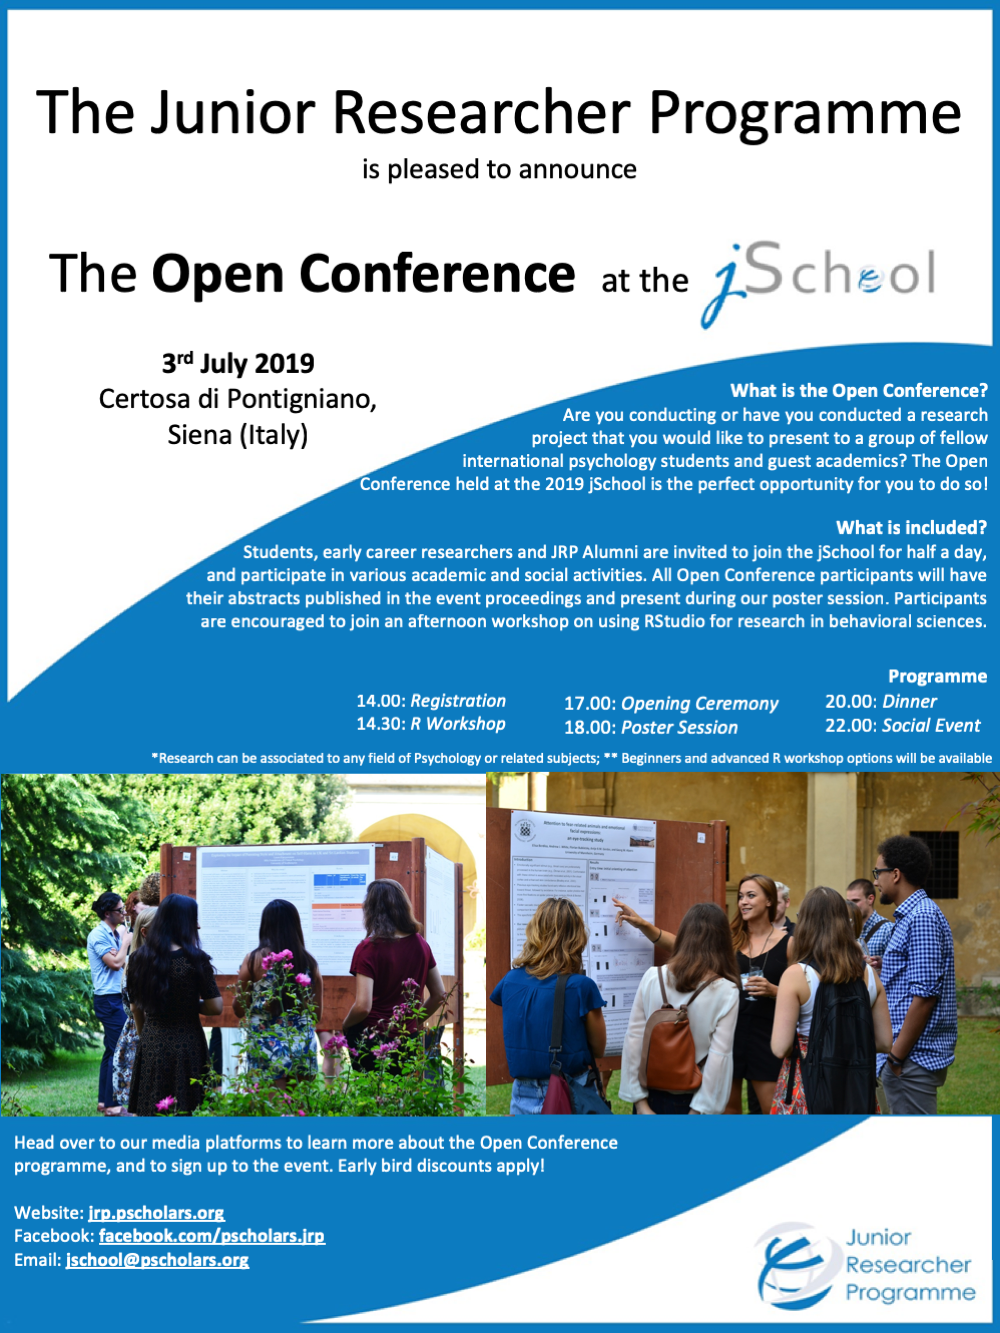 The Open Conference at the jSchool